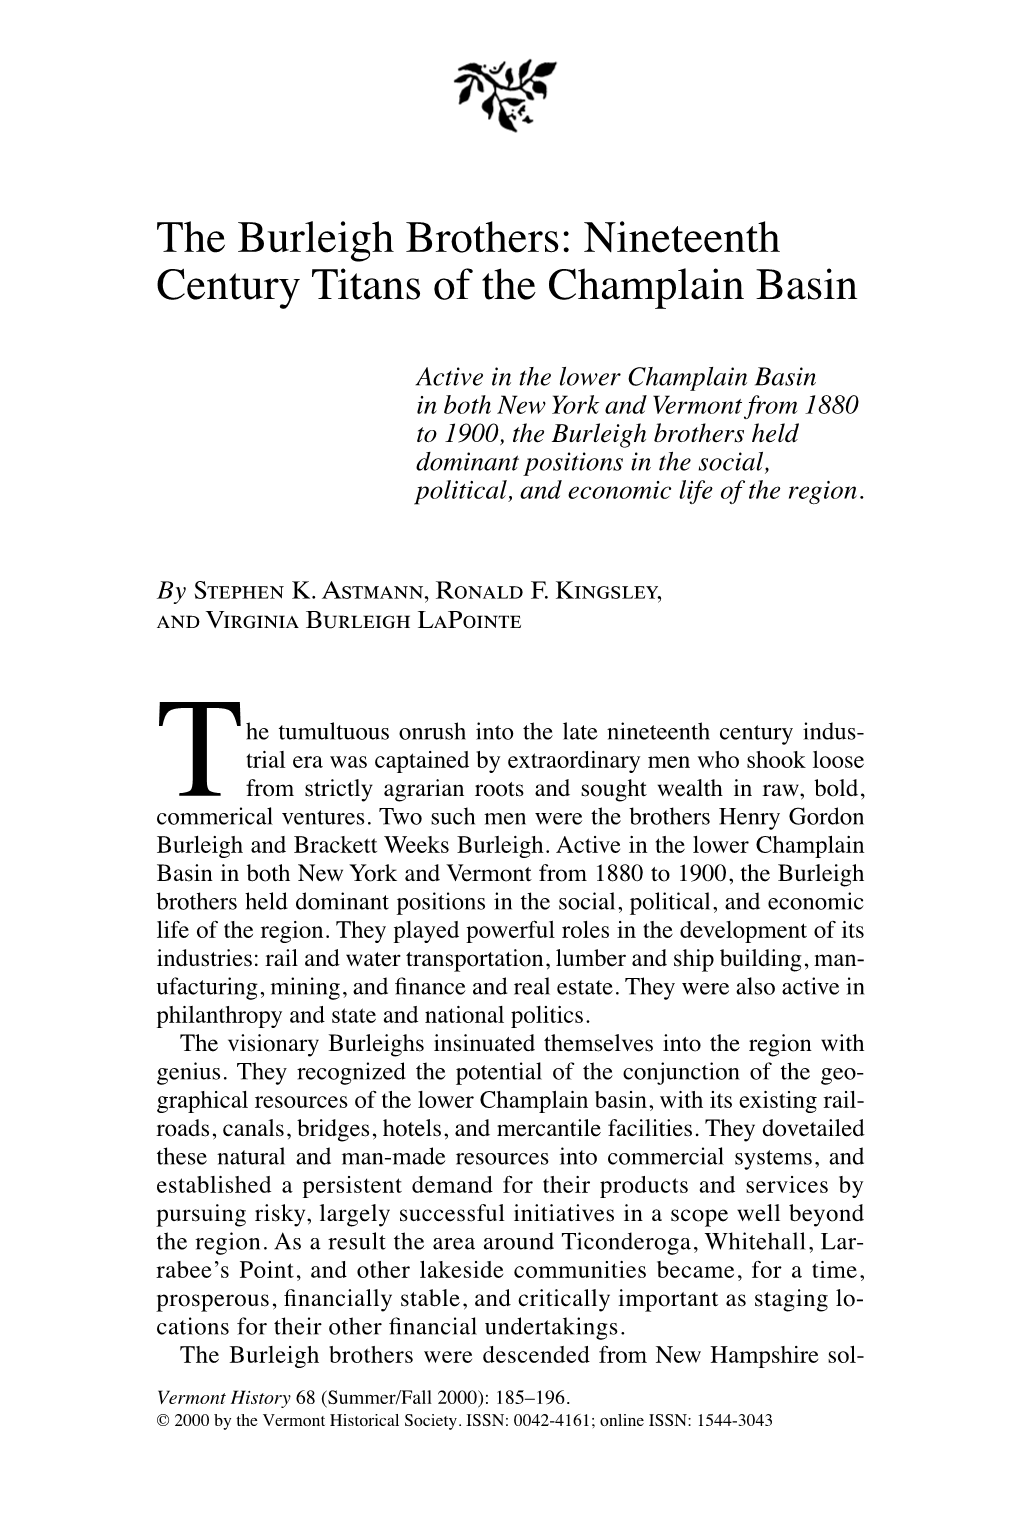 The Burleigh Brothers: Nineteenth Century Titans of the Champlain Basin